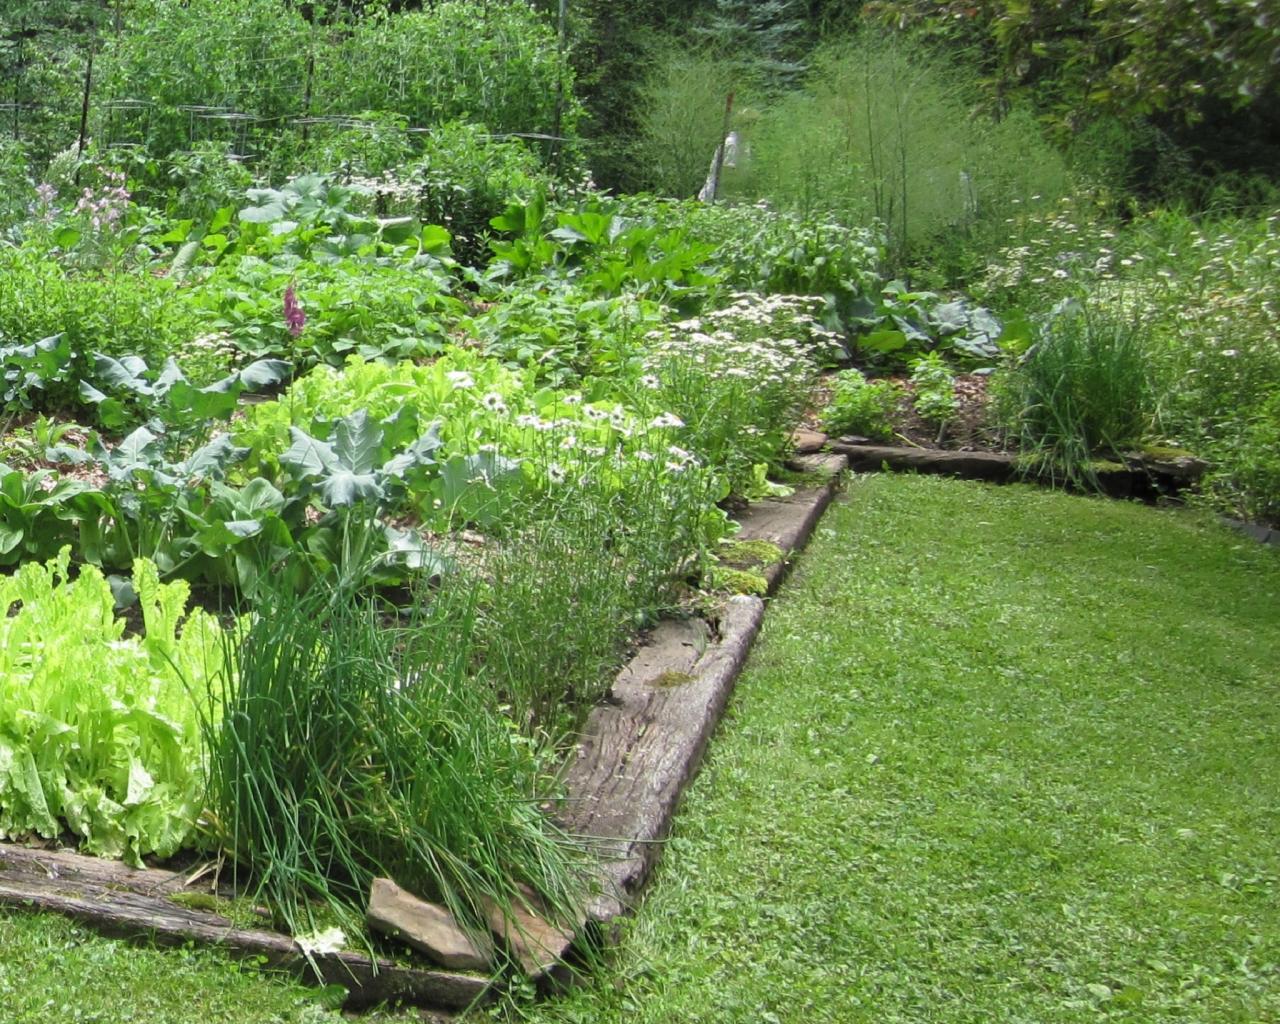 Weeds And Lawn Away From Flower Beds, Cutting Edge Garden Design